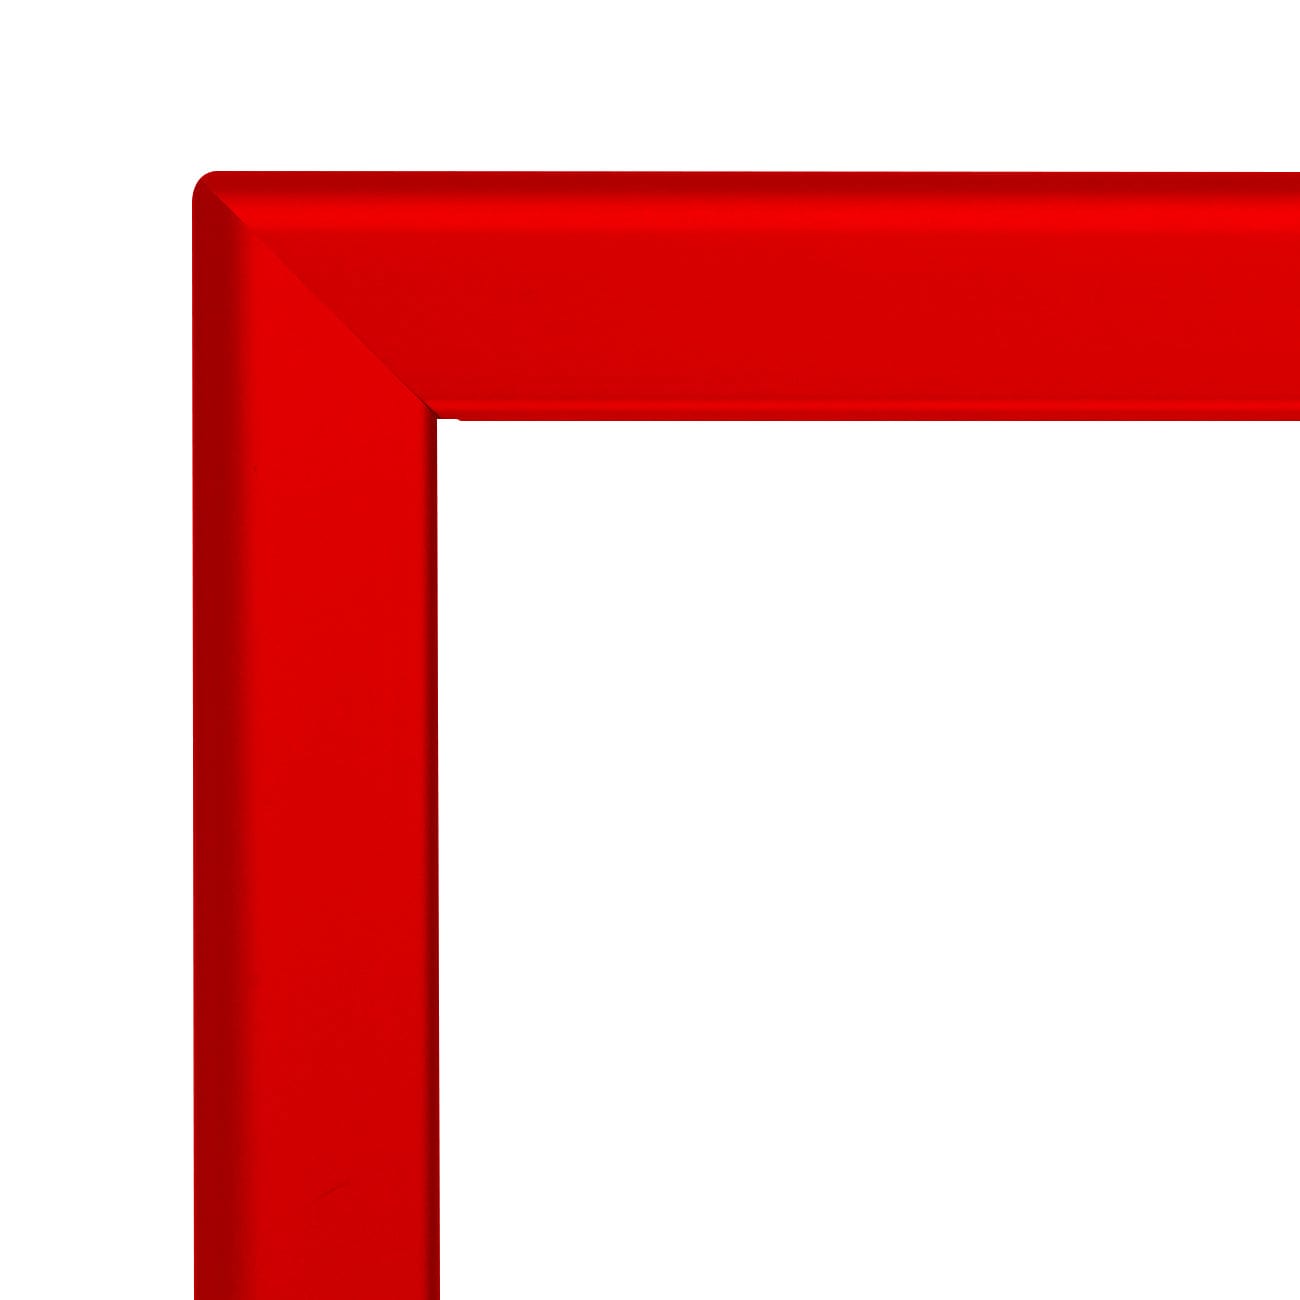 36x48  TRADEframe Red Snap Frame 36x48 - 1.25 inch profile - Snap Frames Direct